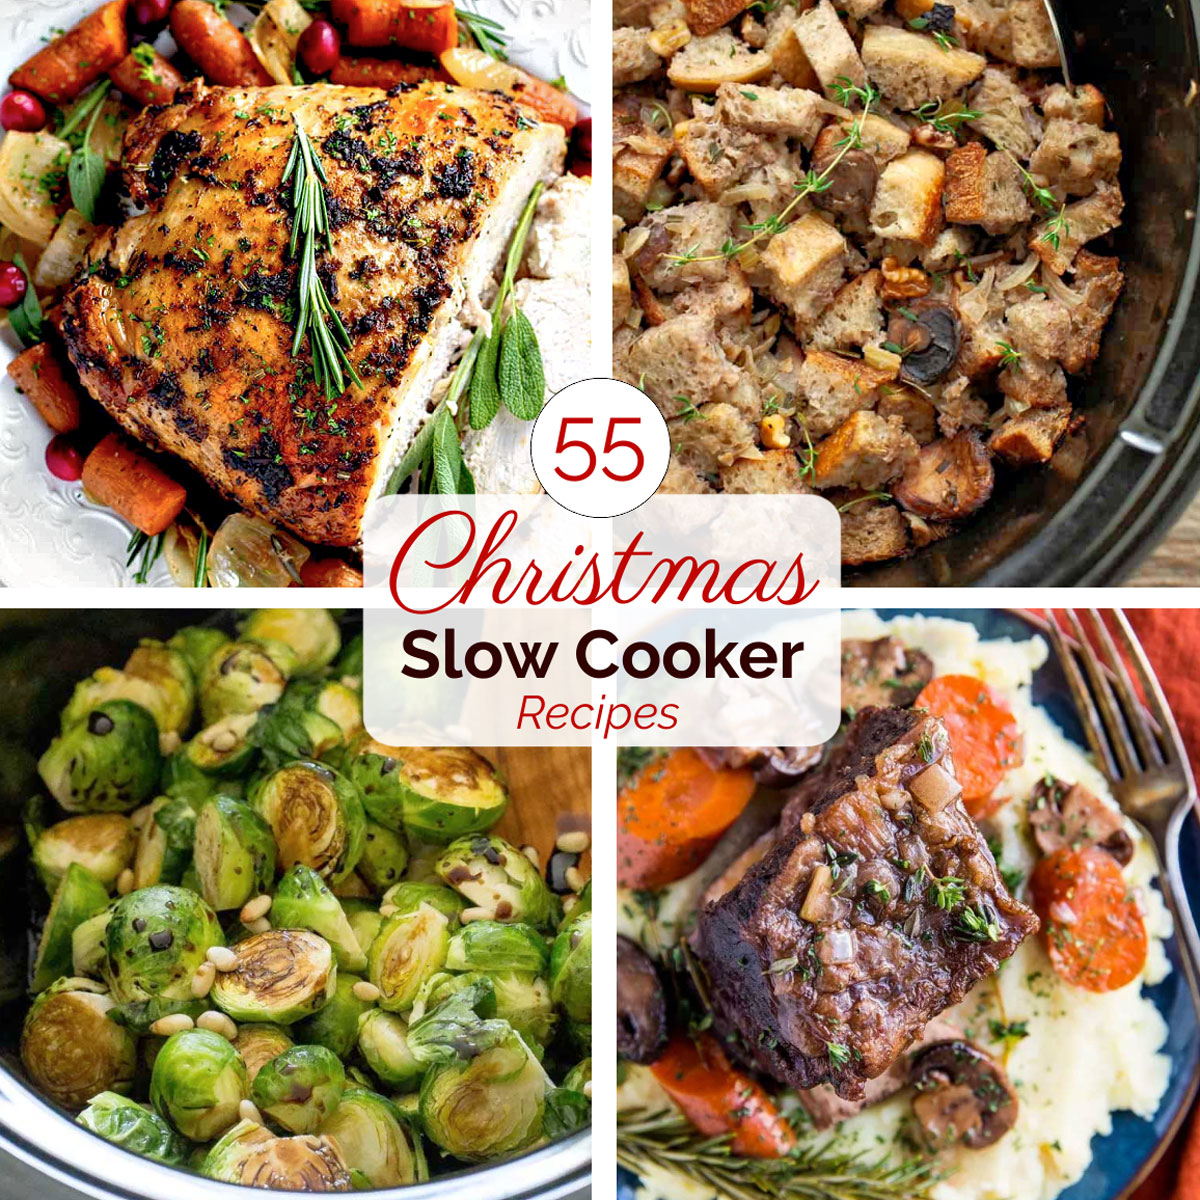 Square collage of four recipe pictures with text overlay "55 Christmas Slow Cooker Recipes".